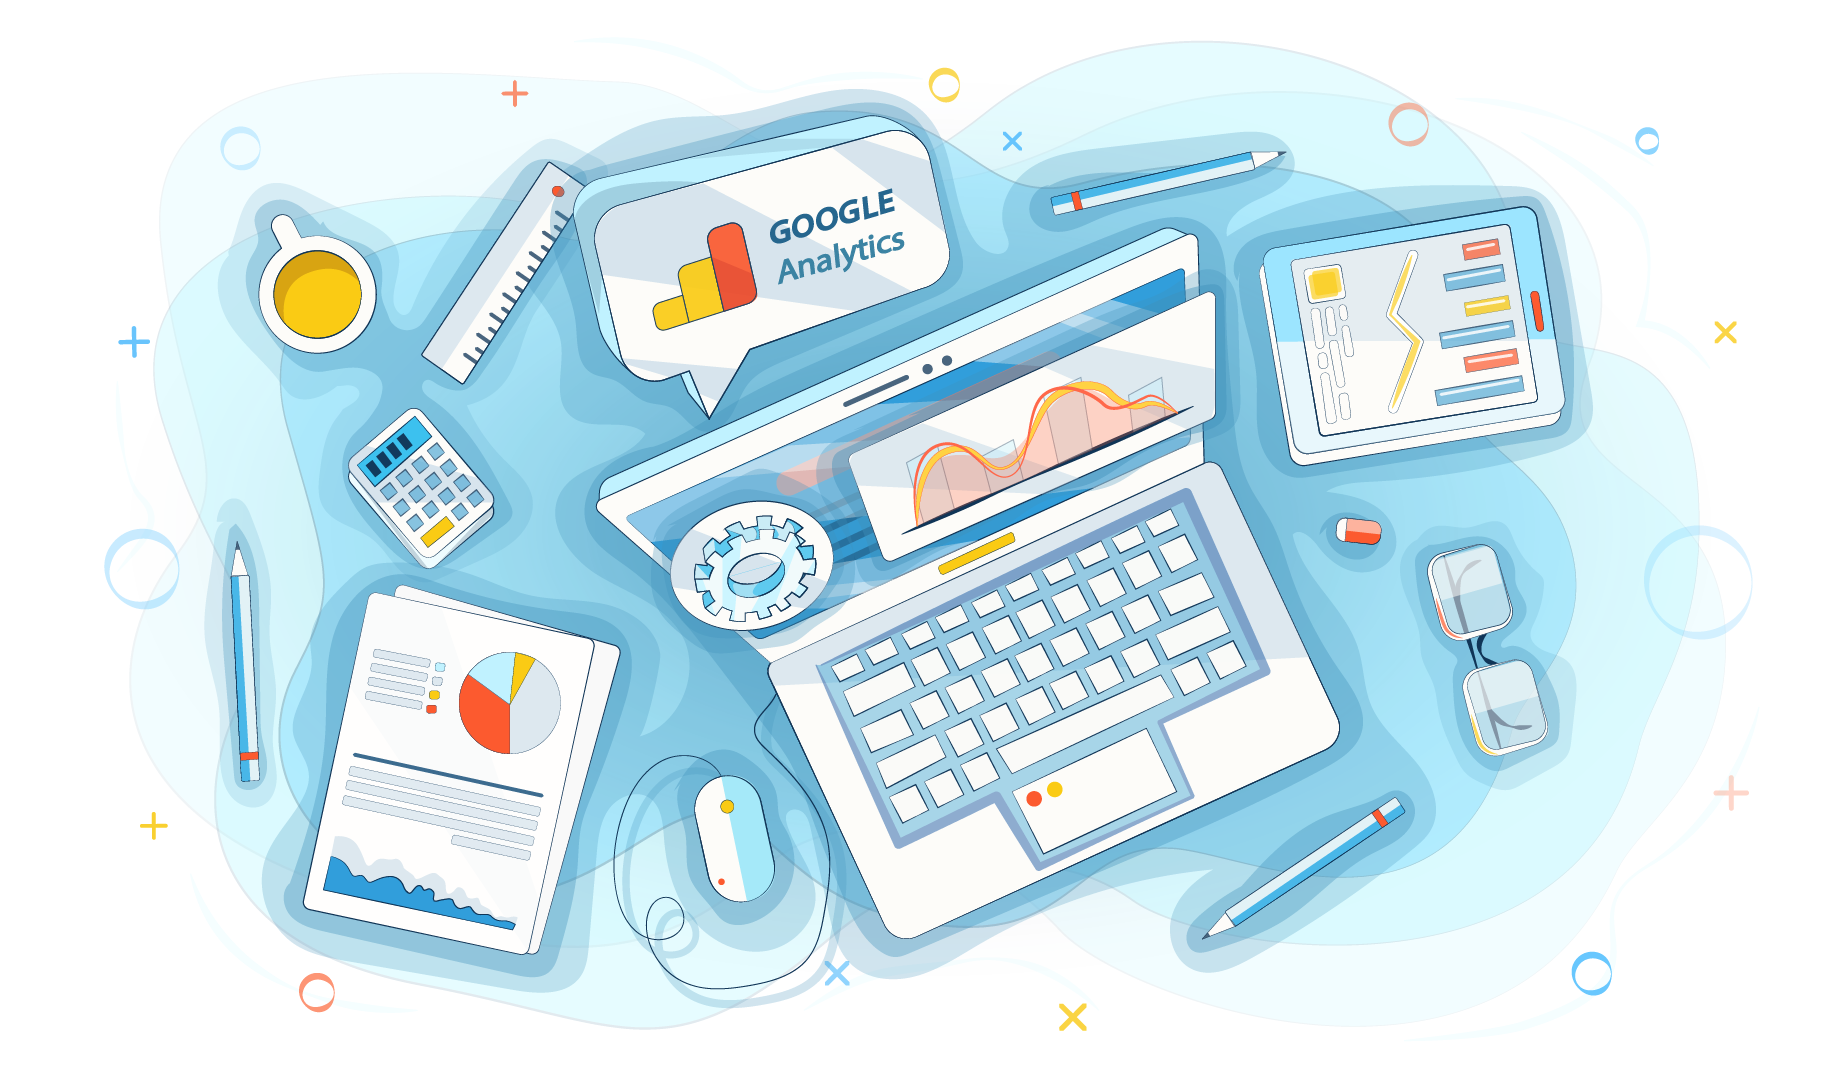 Google Analytics 101: main features you need to know